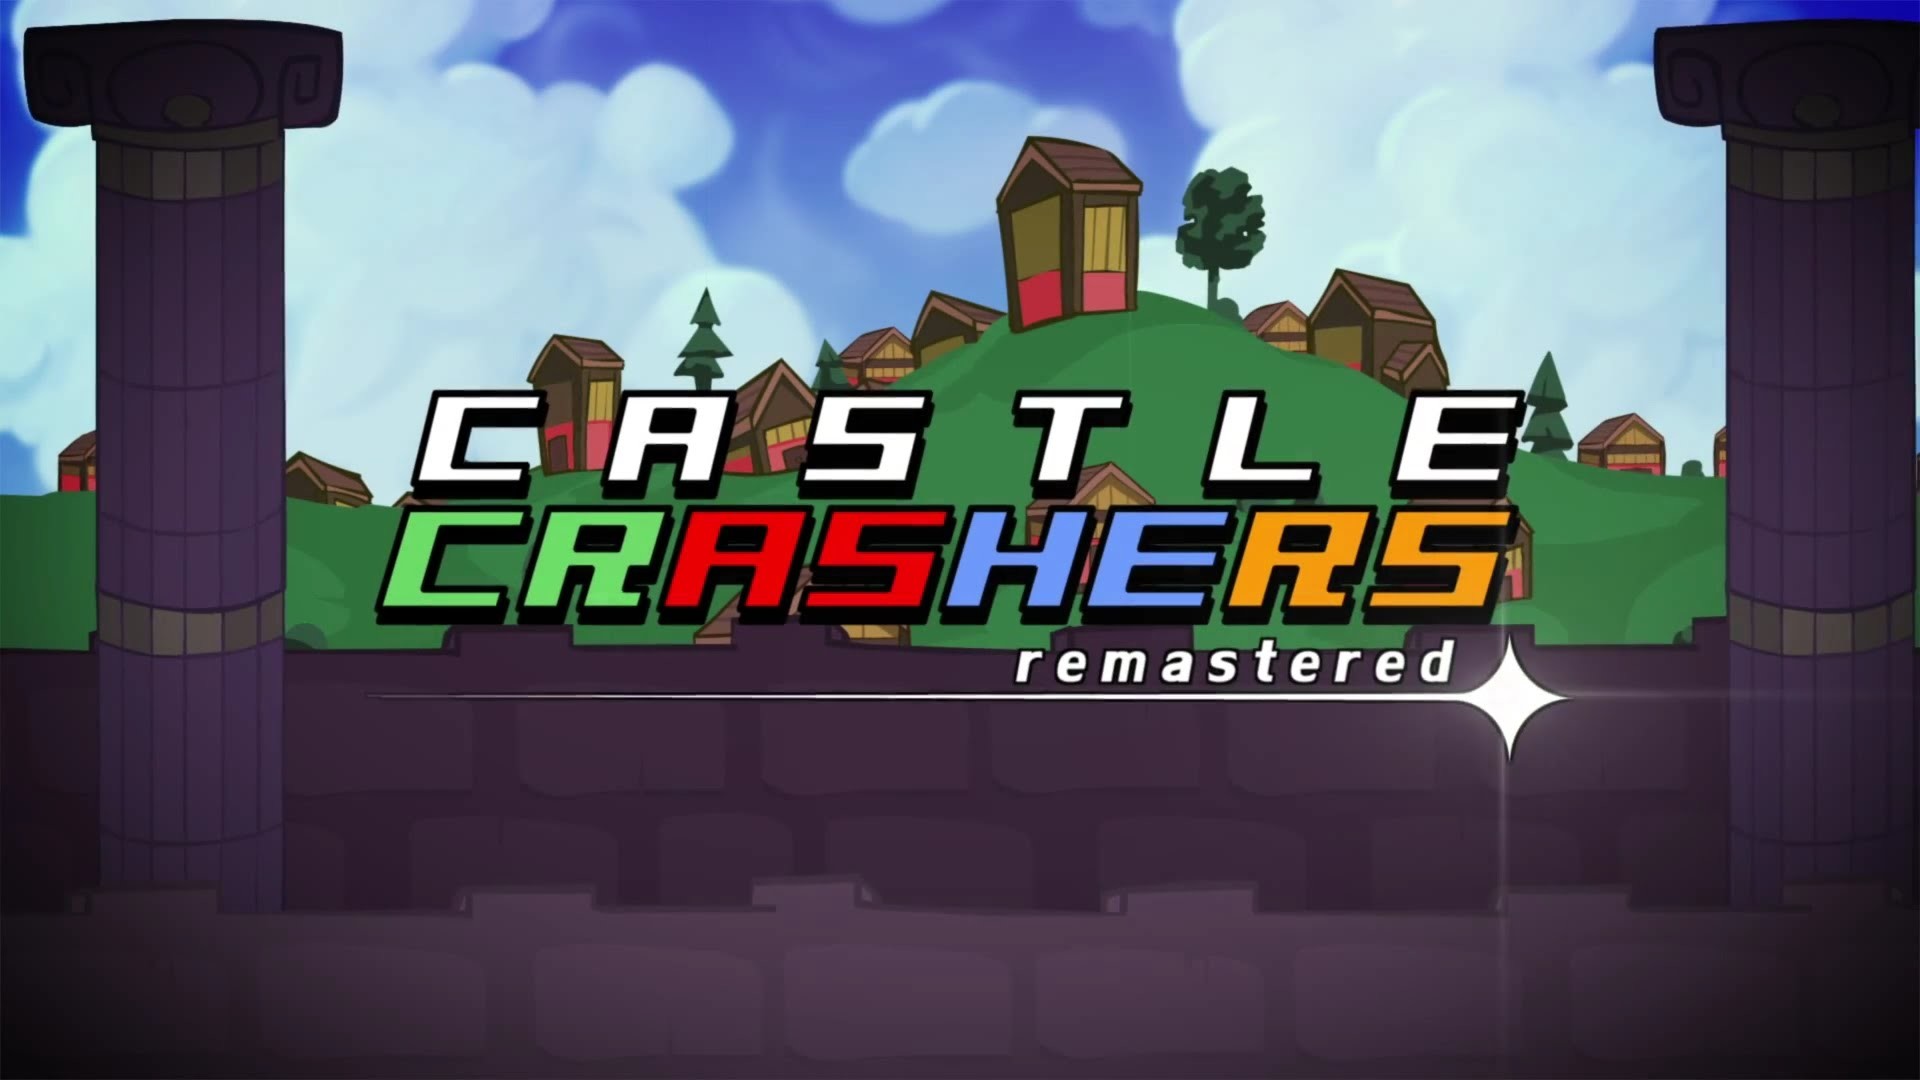 1920x1080 Castle Crashers Remastered Review